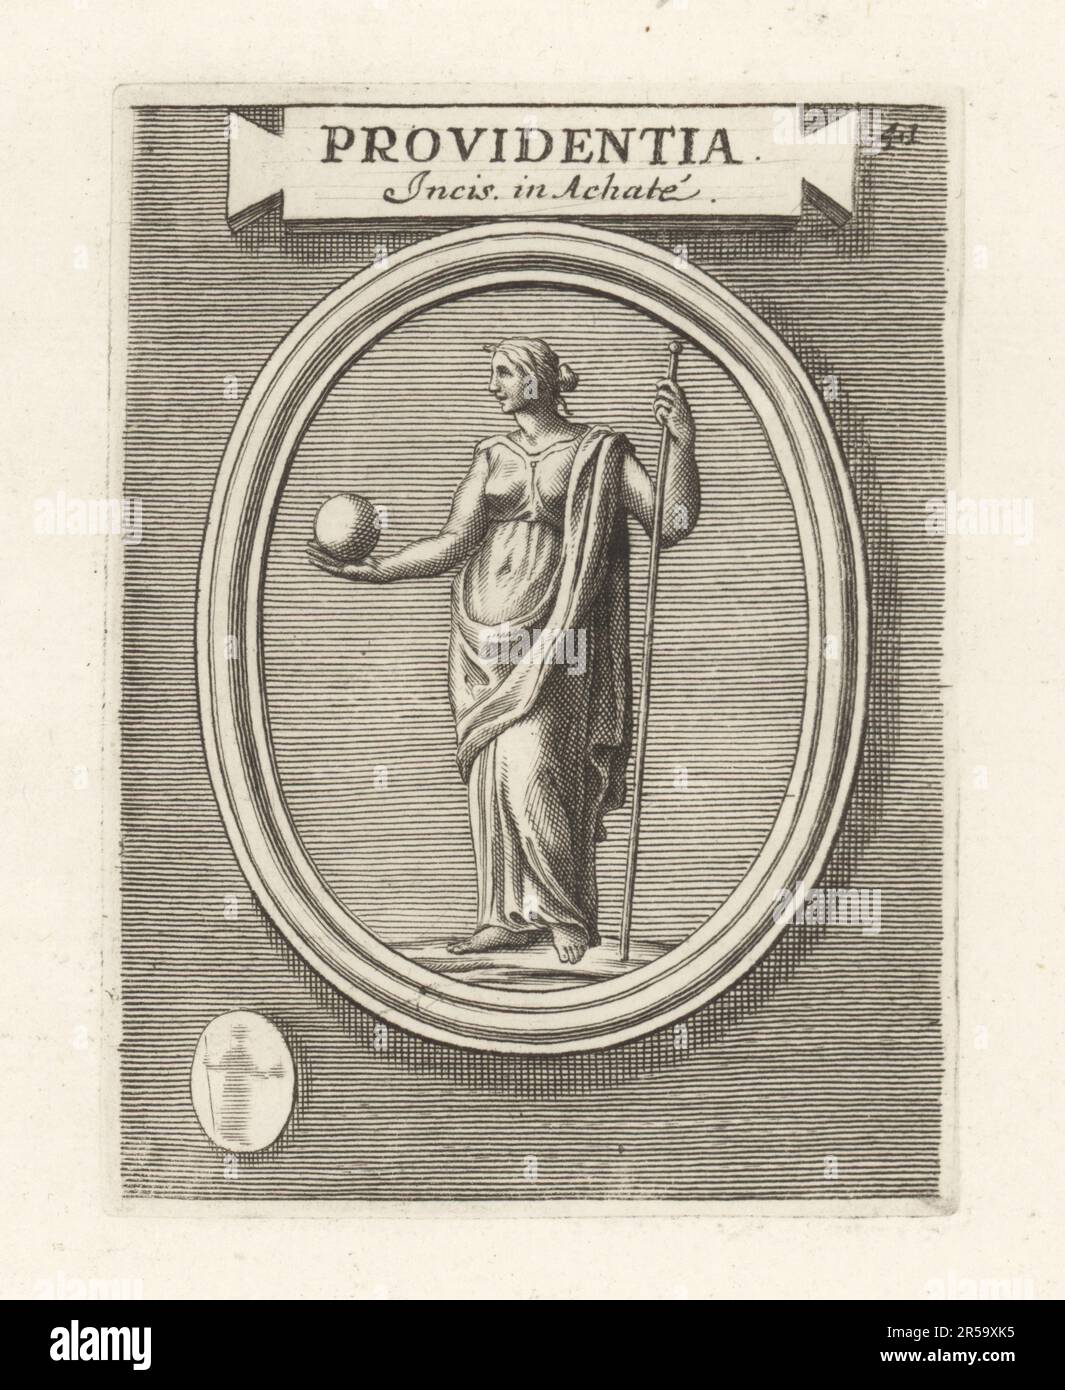 Providentia, Roman divine personification of foresight or providence, with orb and spear. From an engraved agate gem on a heretical amulet. Providentia Incis in Achate. Copperplate engraving from Francesco Valesio, Antonio Gori and Ridolfino Venuti’s Academia Etrusca, Museum Cortonense in quo Vetera Monumenta, (Etruscan Academy or Museum of Cortona), Faustus Amideus, Rome, 1750. Stock Photo